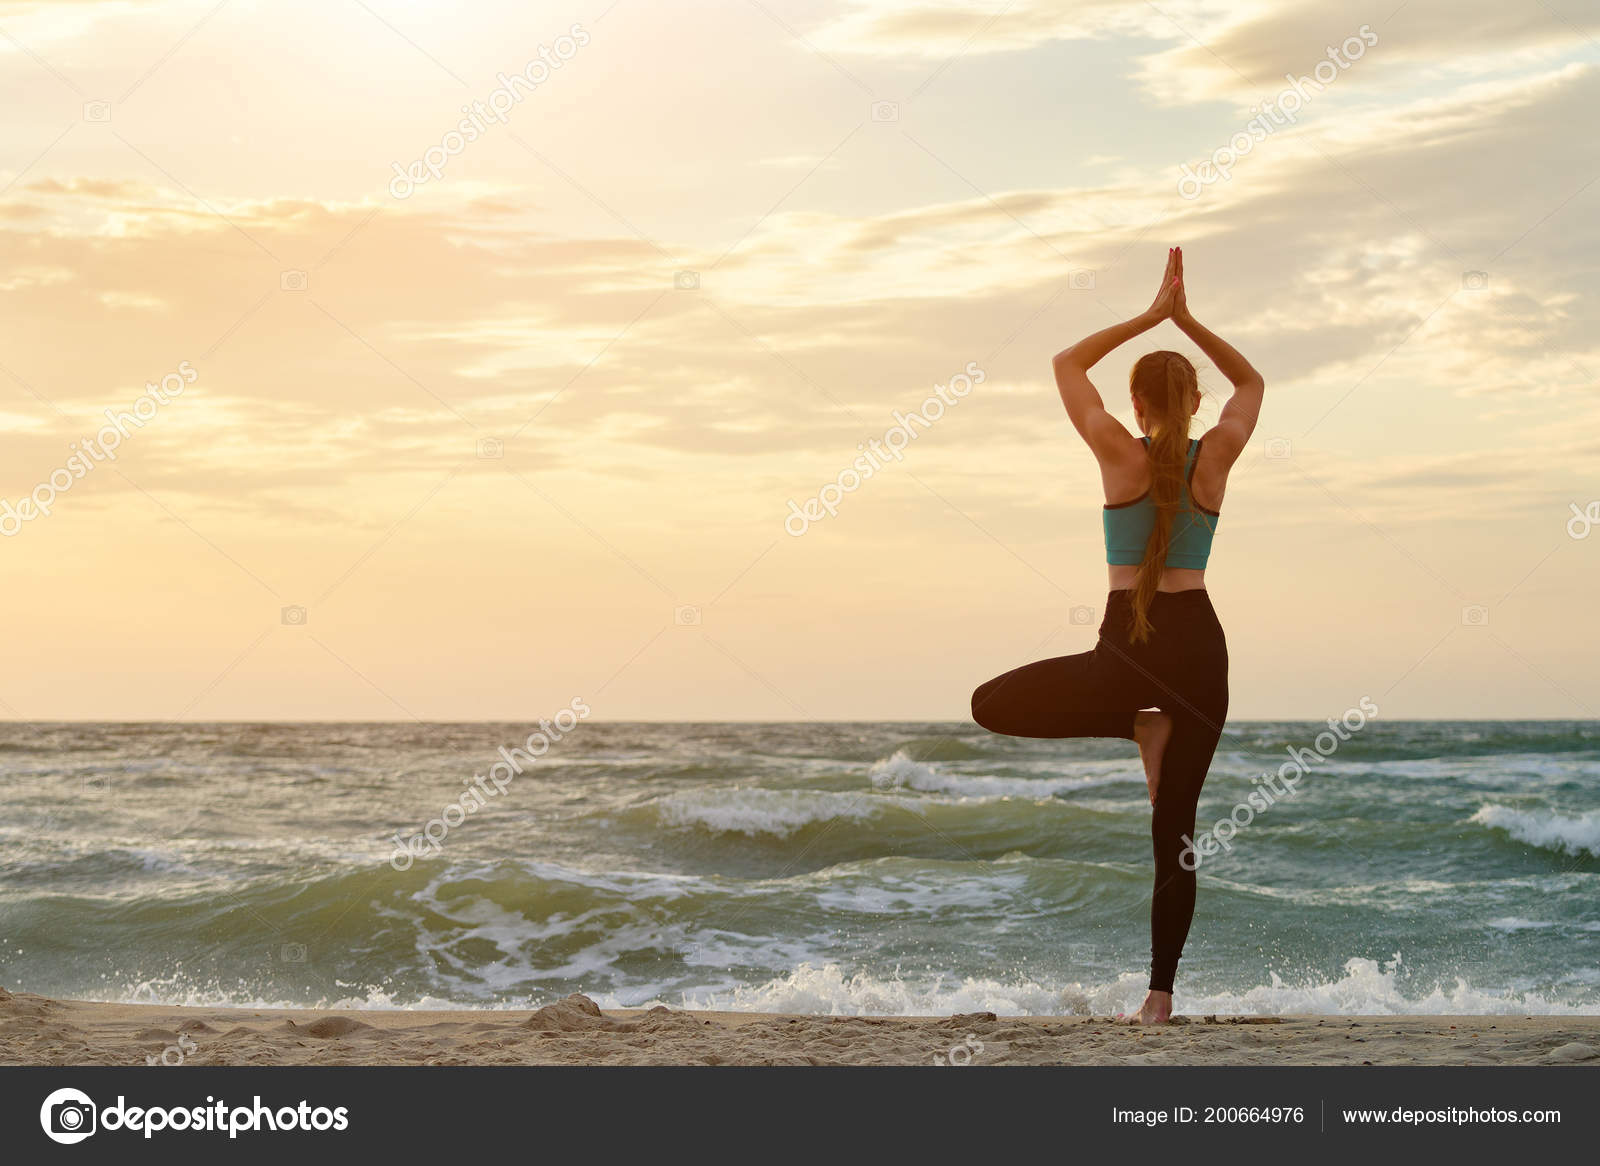 5 Yoga poses to keep practicing this summer from the beach